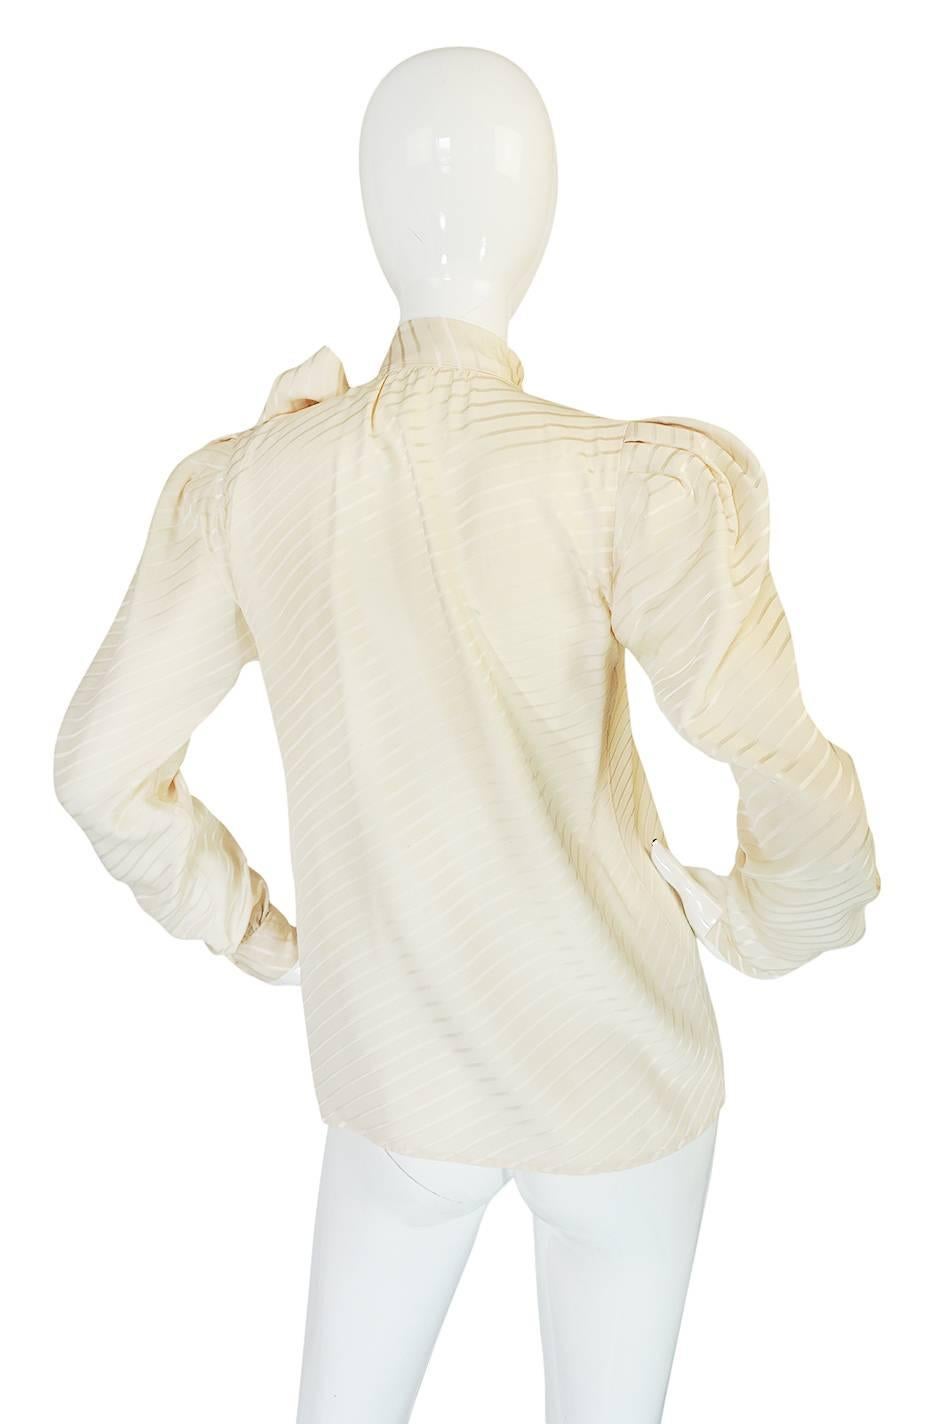 This is a classic signature look, silk secretary blouse by Yves Saint Laurent done in a beautiful rich cream silk with a angled line woven through the fabric. The silk is cut on the bias so once it is on the body the top moves and drapes perfectly